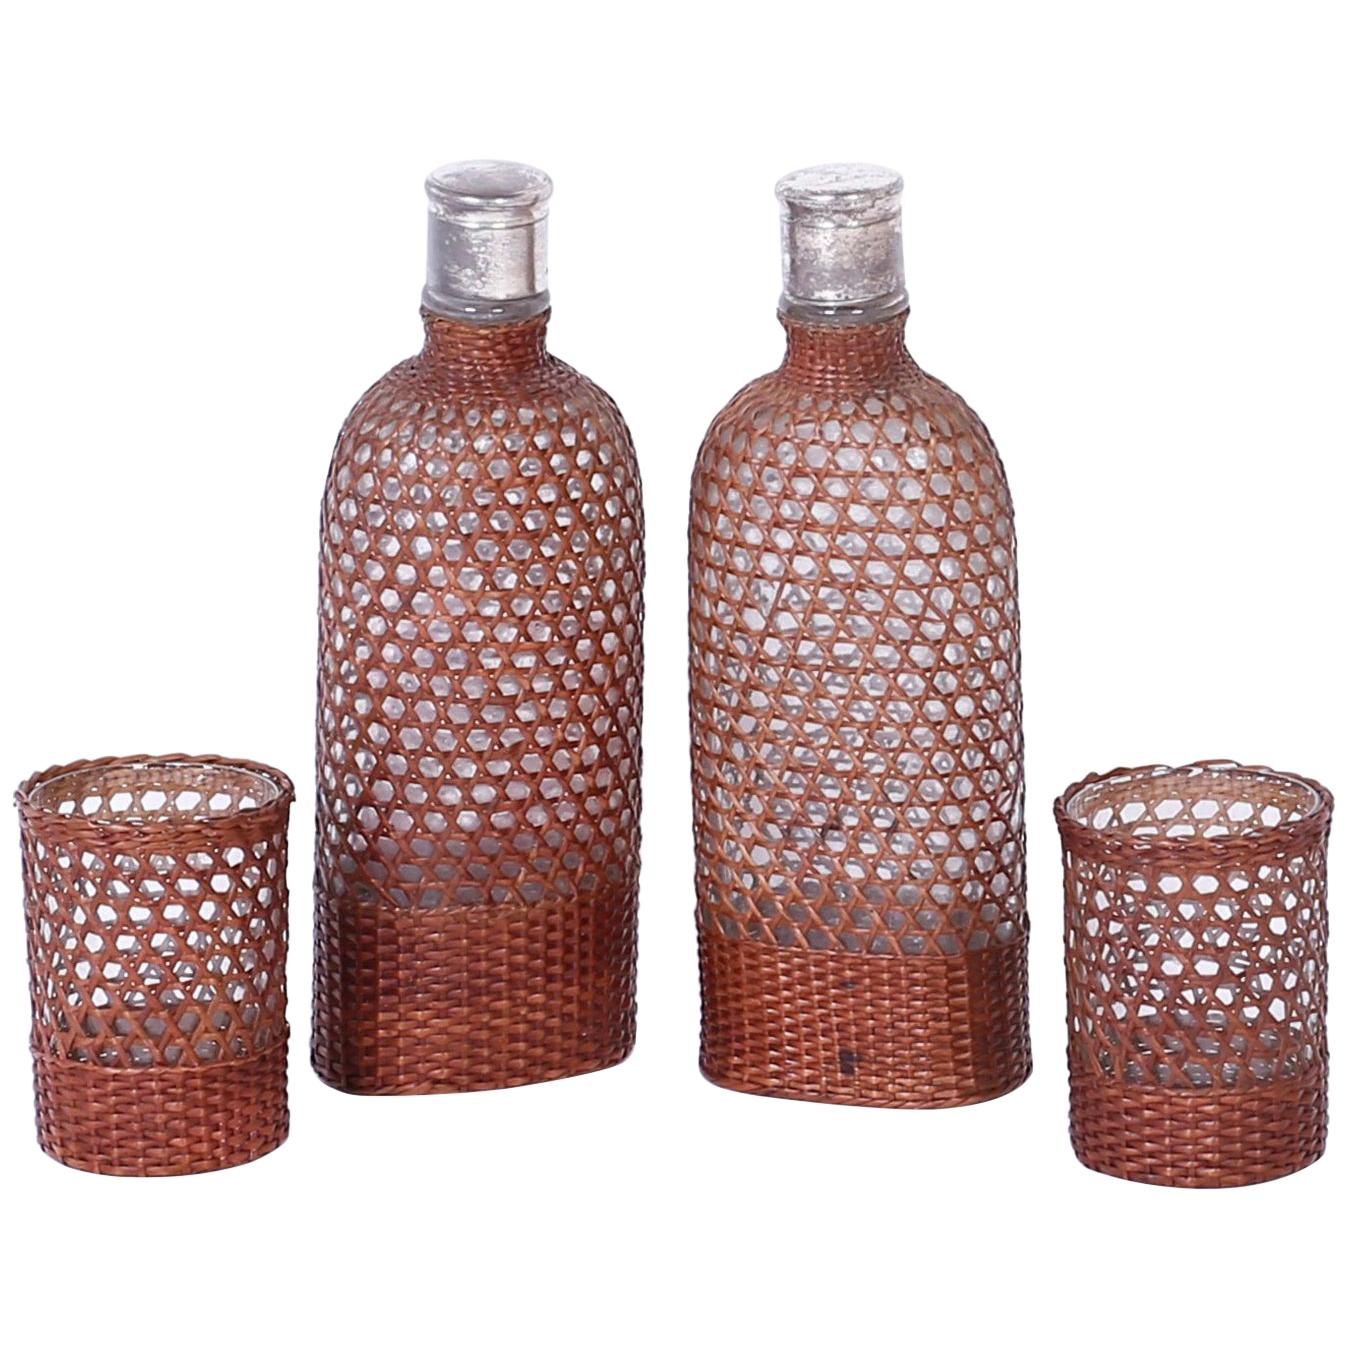 Vintage Set of Drinking Vessels Wrapped in Wicker or Cane